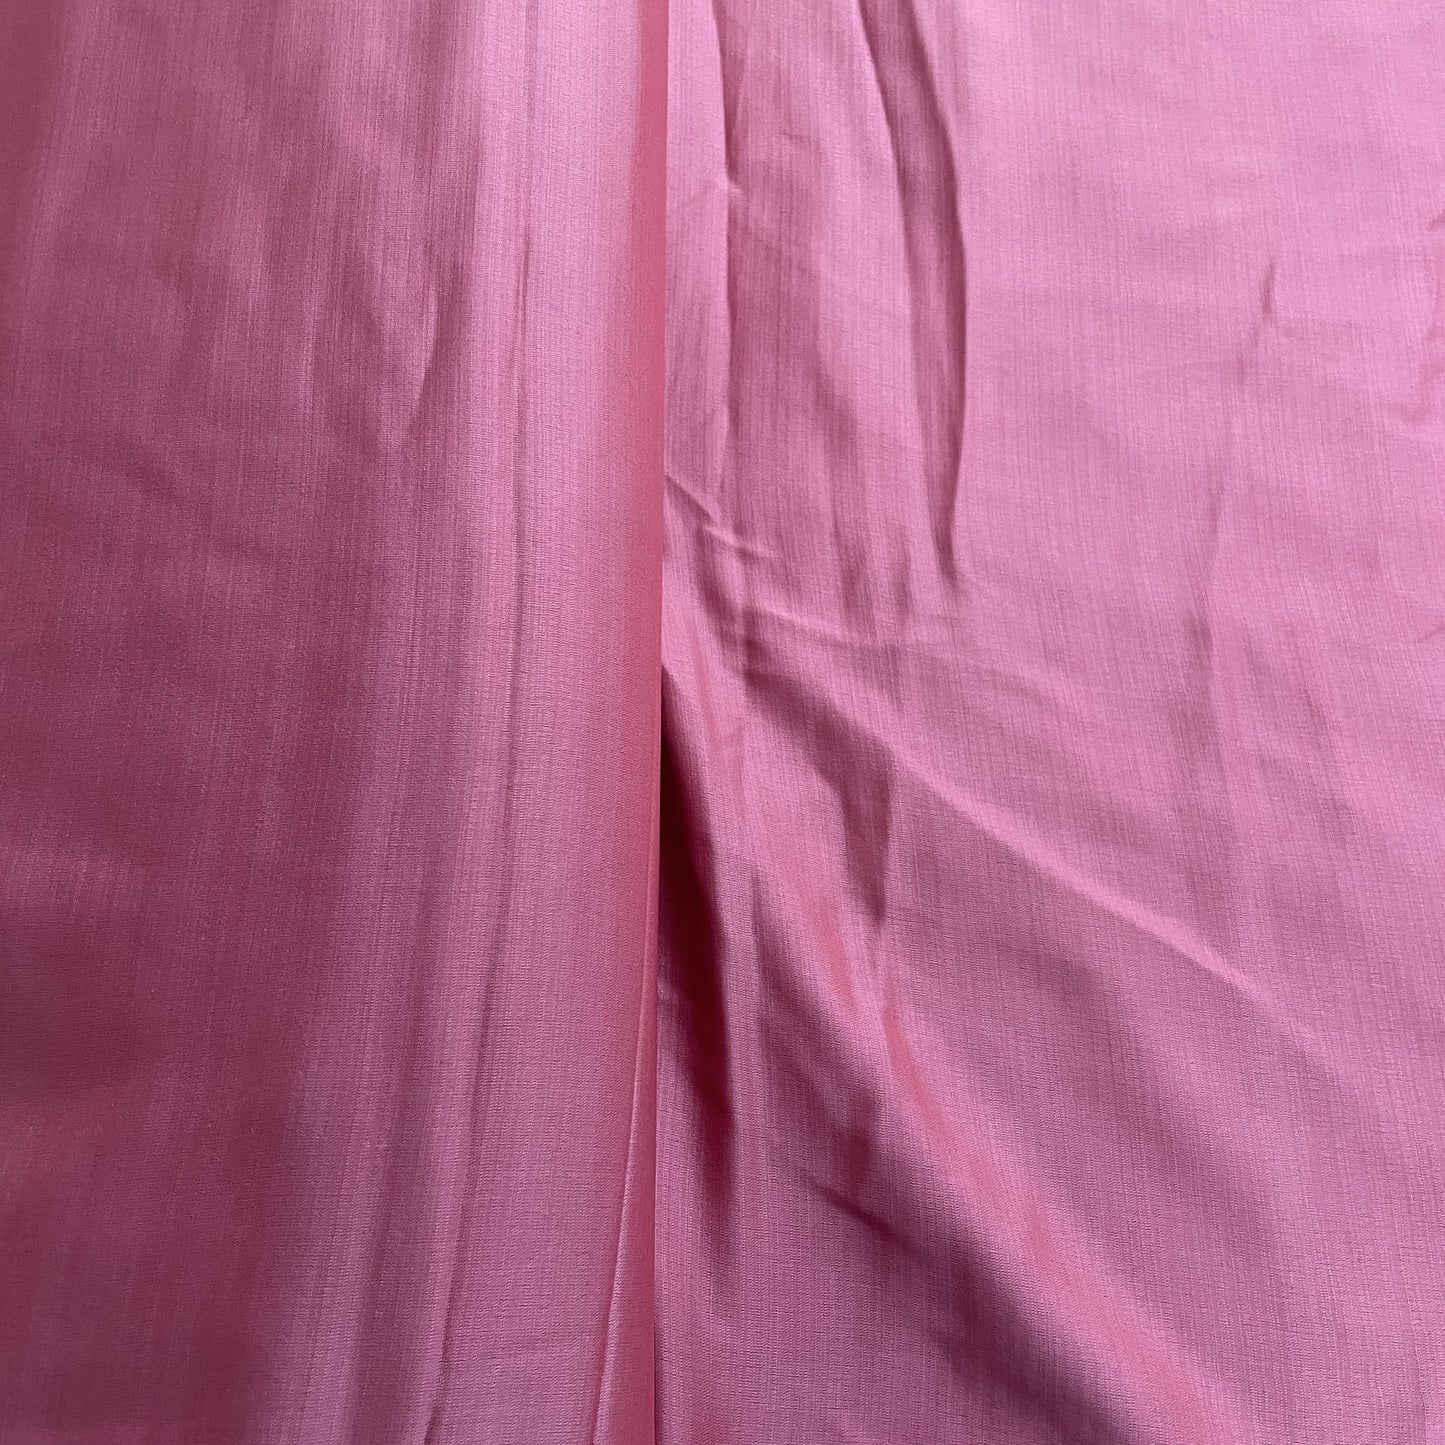 Classic Pink Solid Bemberg Silk